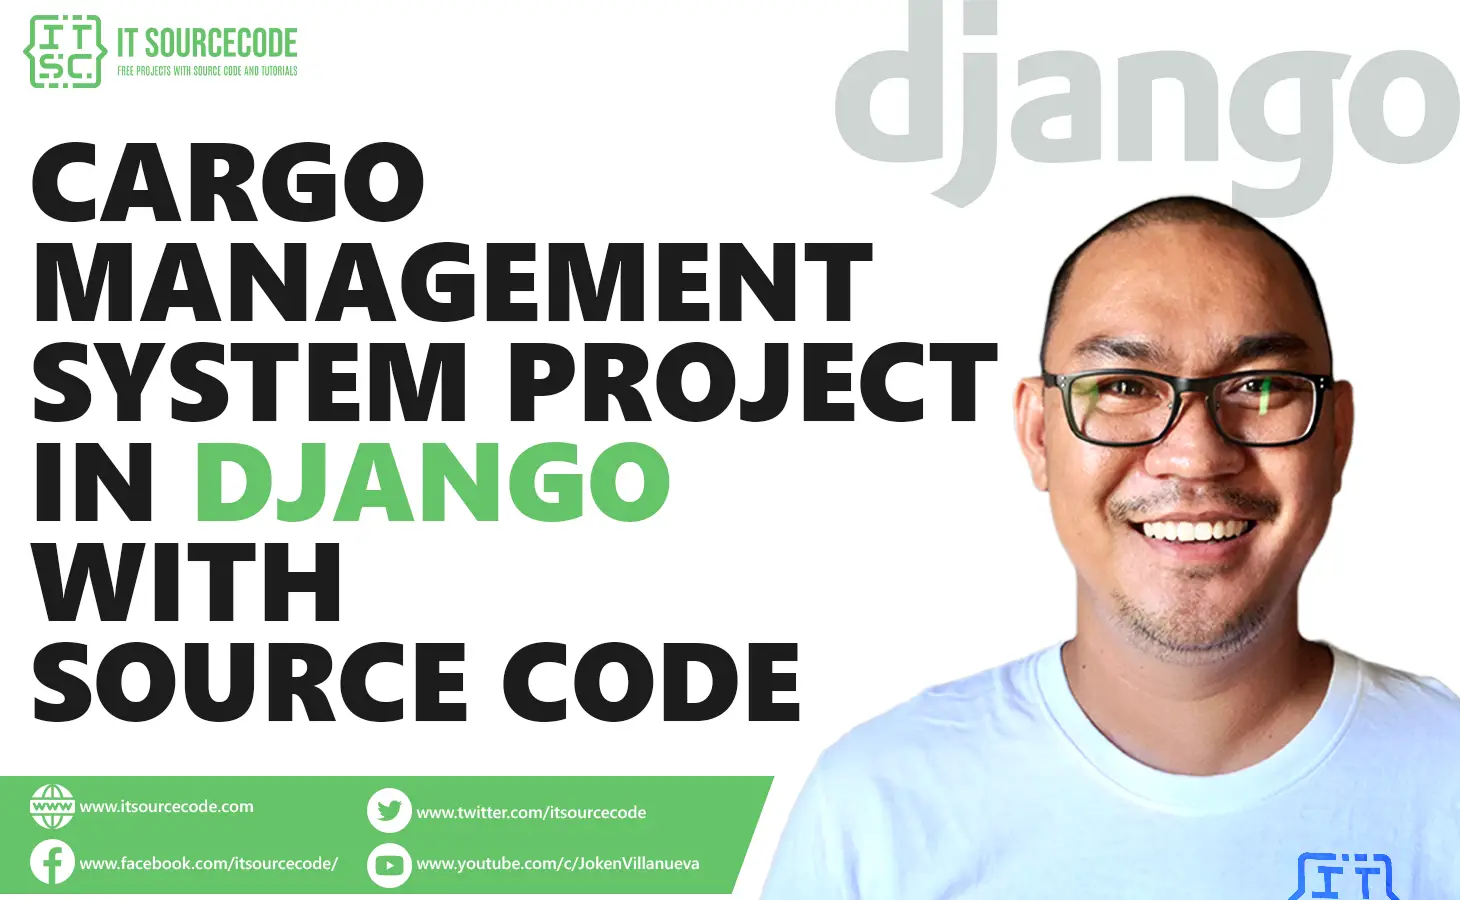 Cargo Management System Project in Django with Source Code